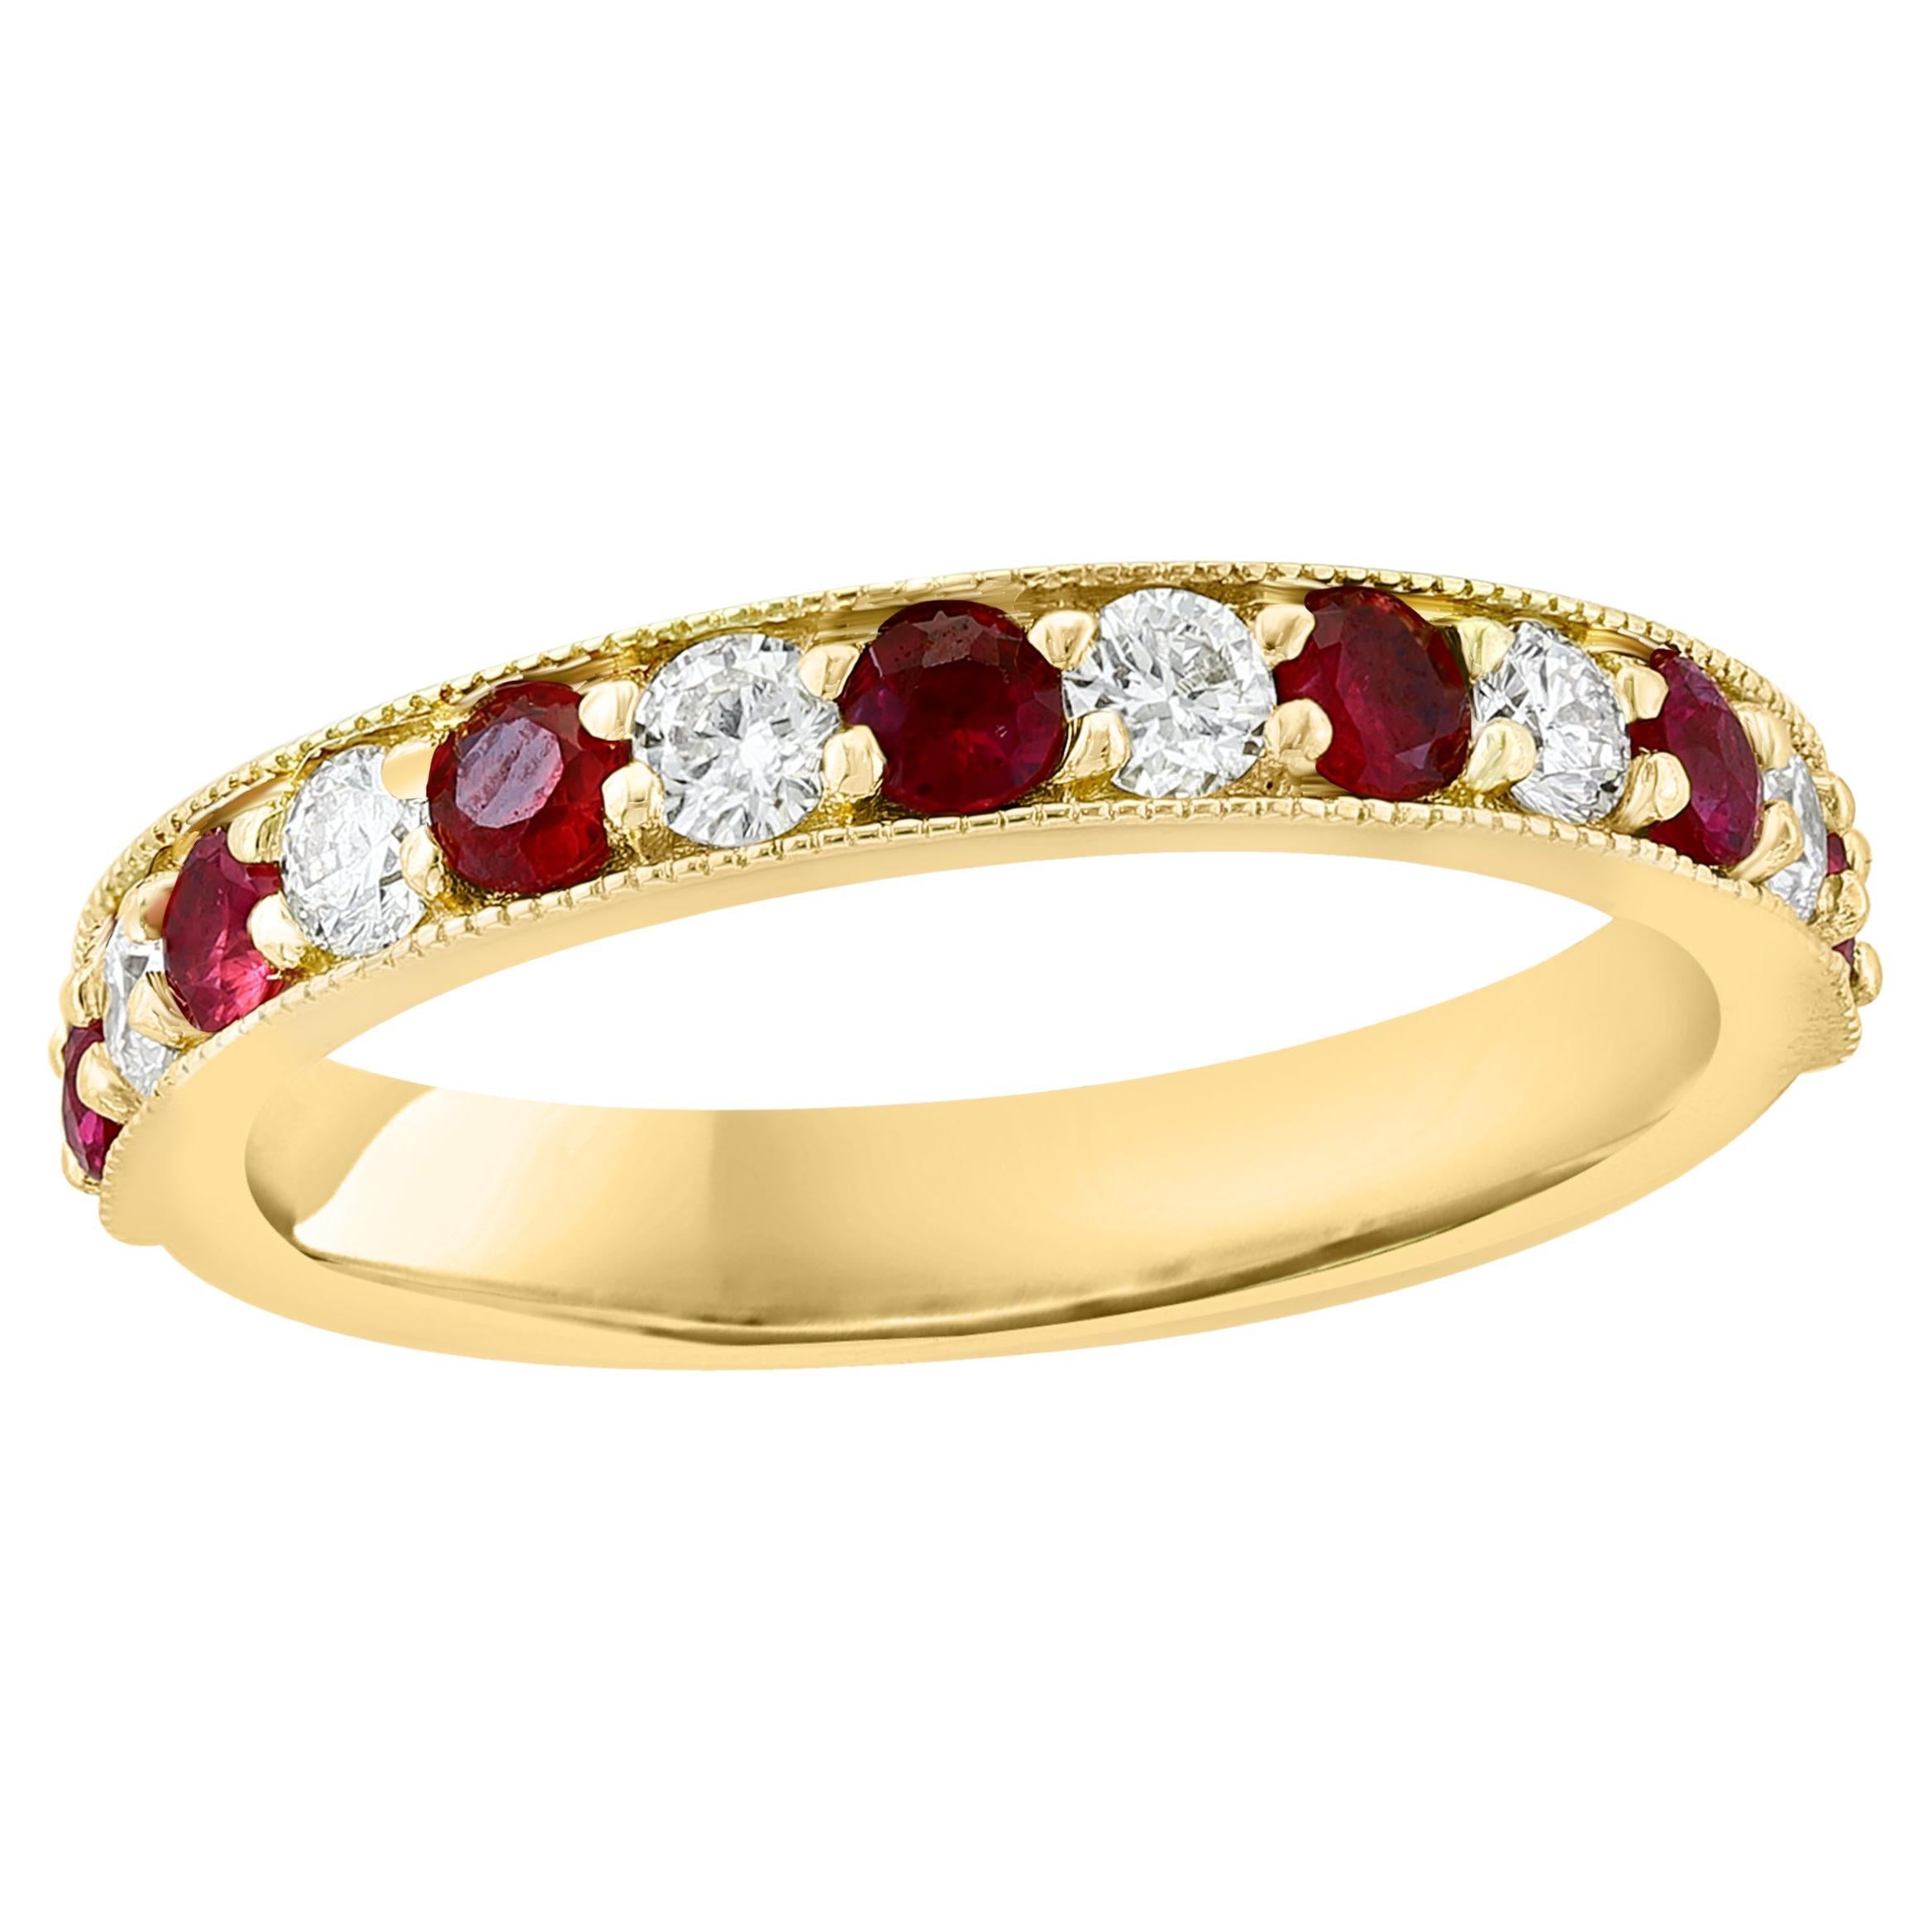 0.62 Carat Brilliant Cut Ruby and Diamond Band in 14K Yellow Gold